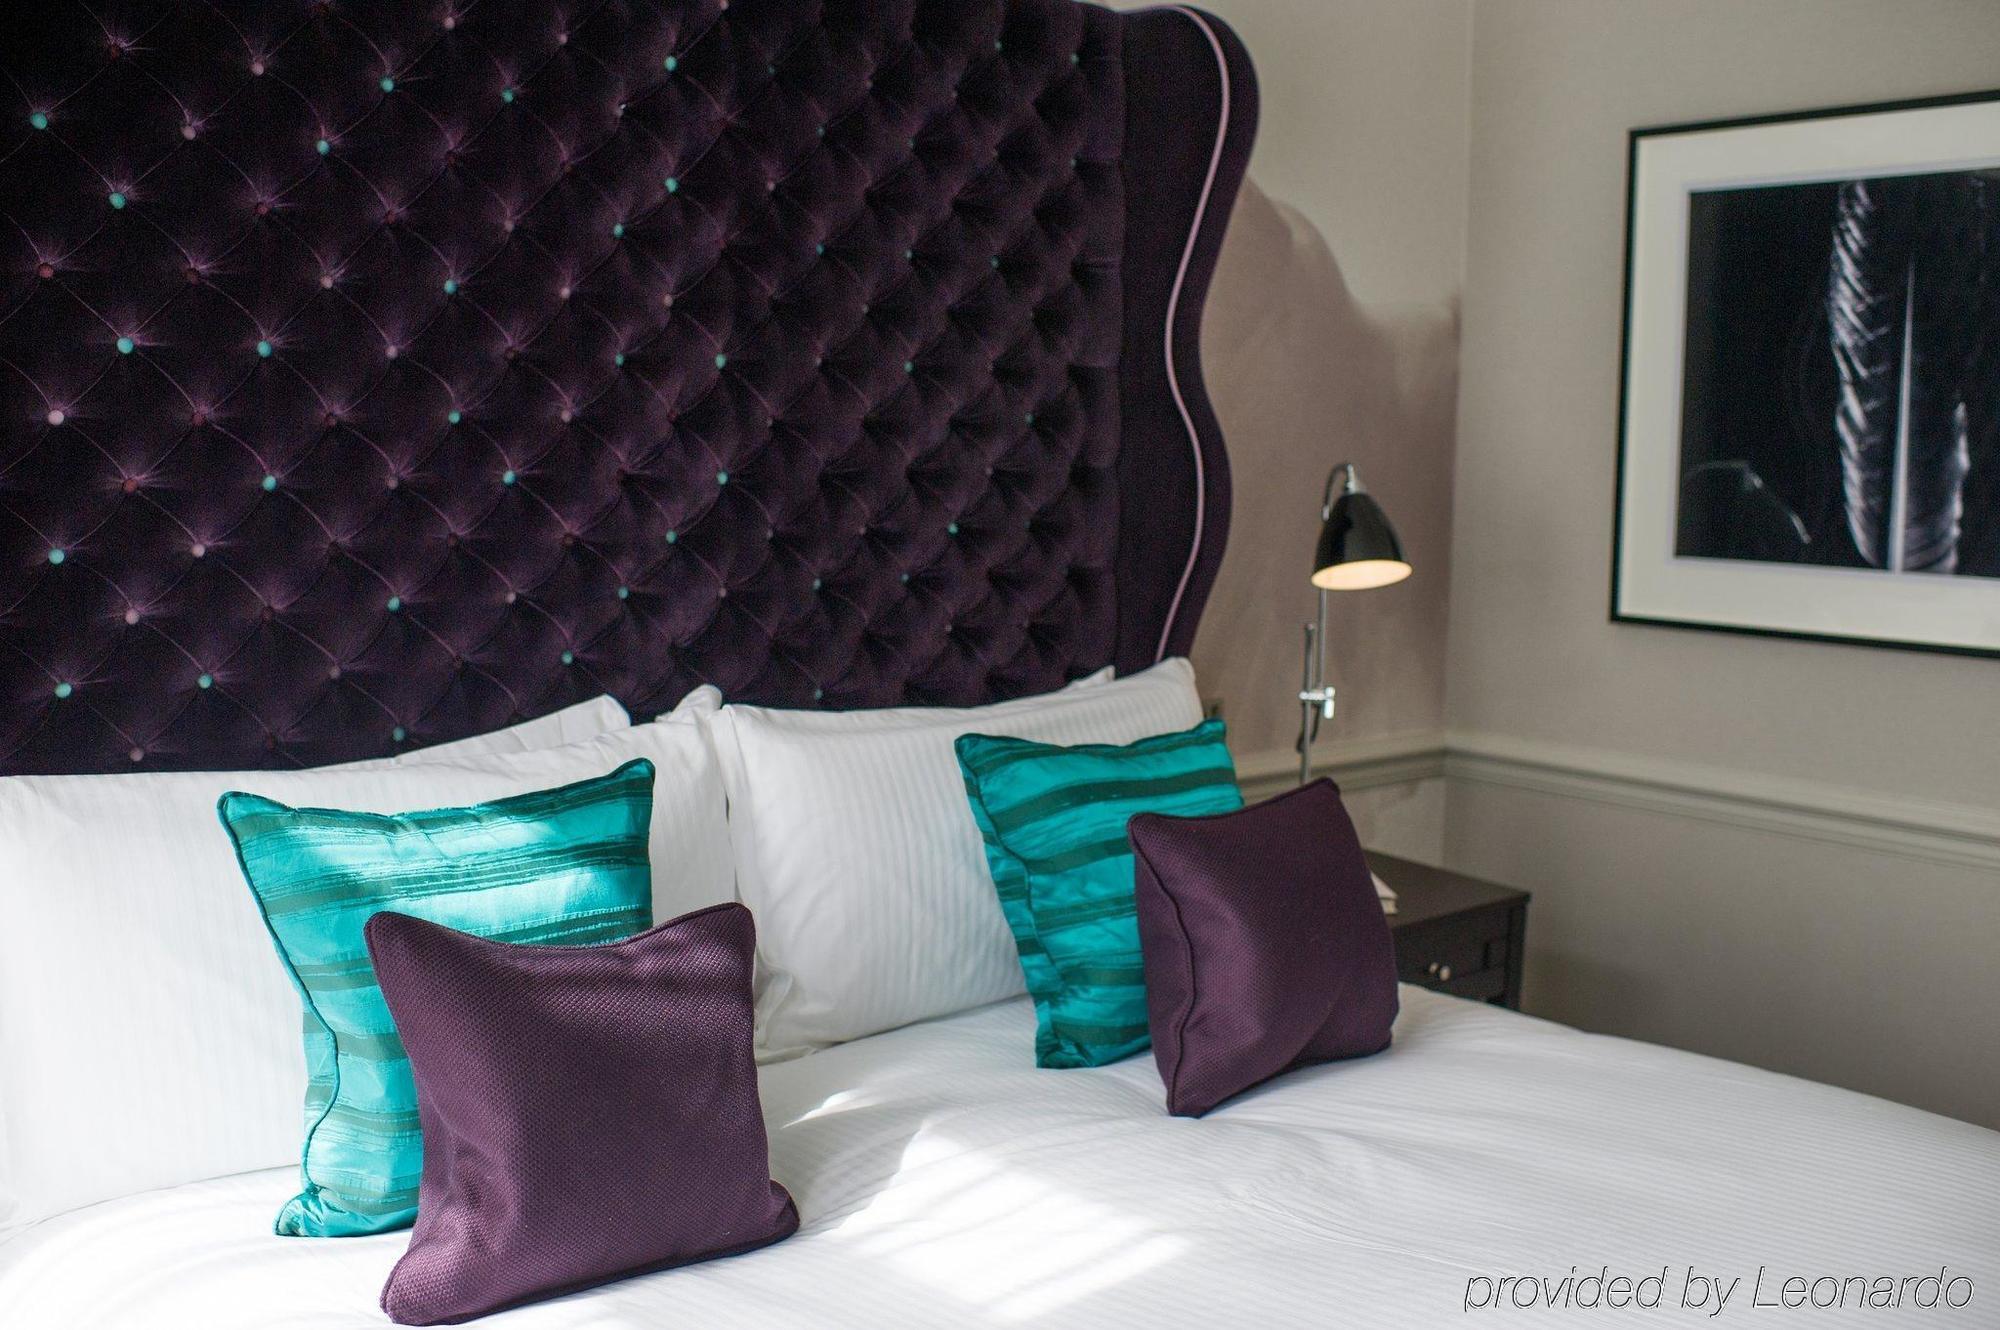 The Ampersand Hotel London Room photo